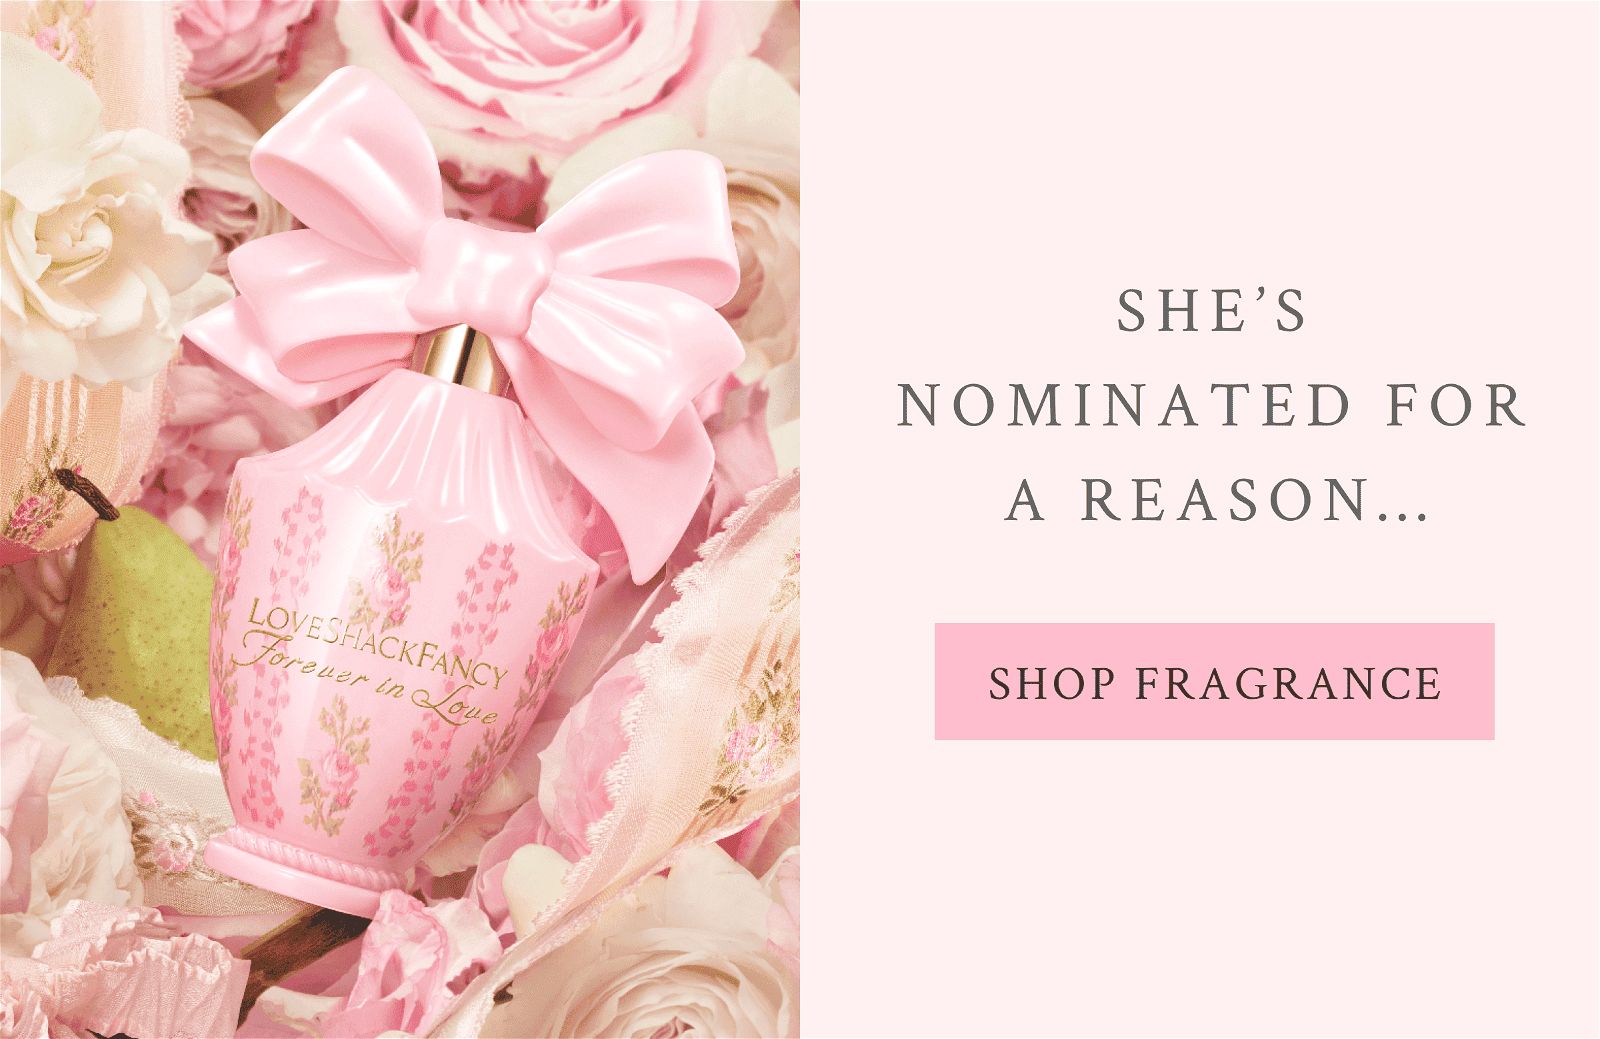 She’s Nominated For A Reason…